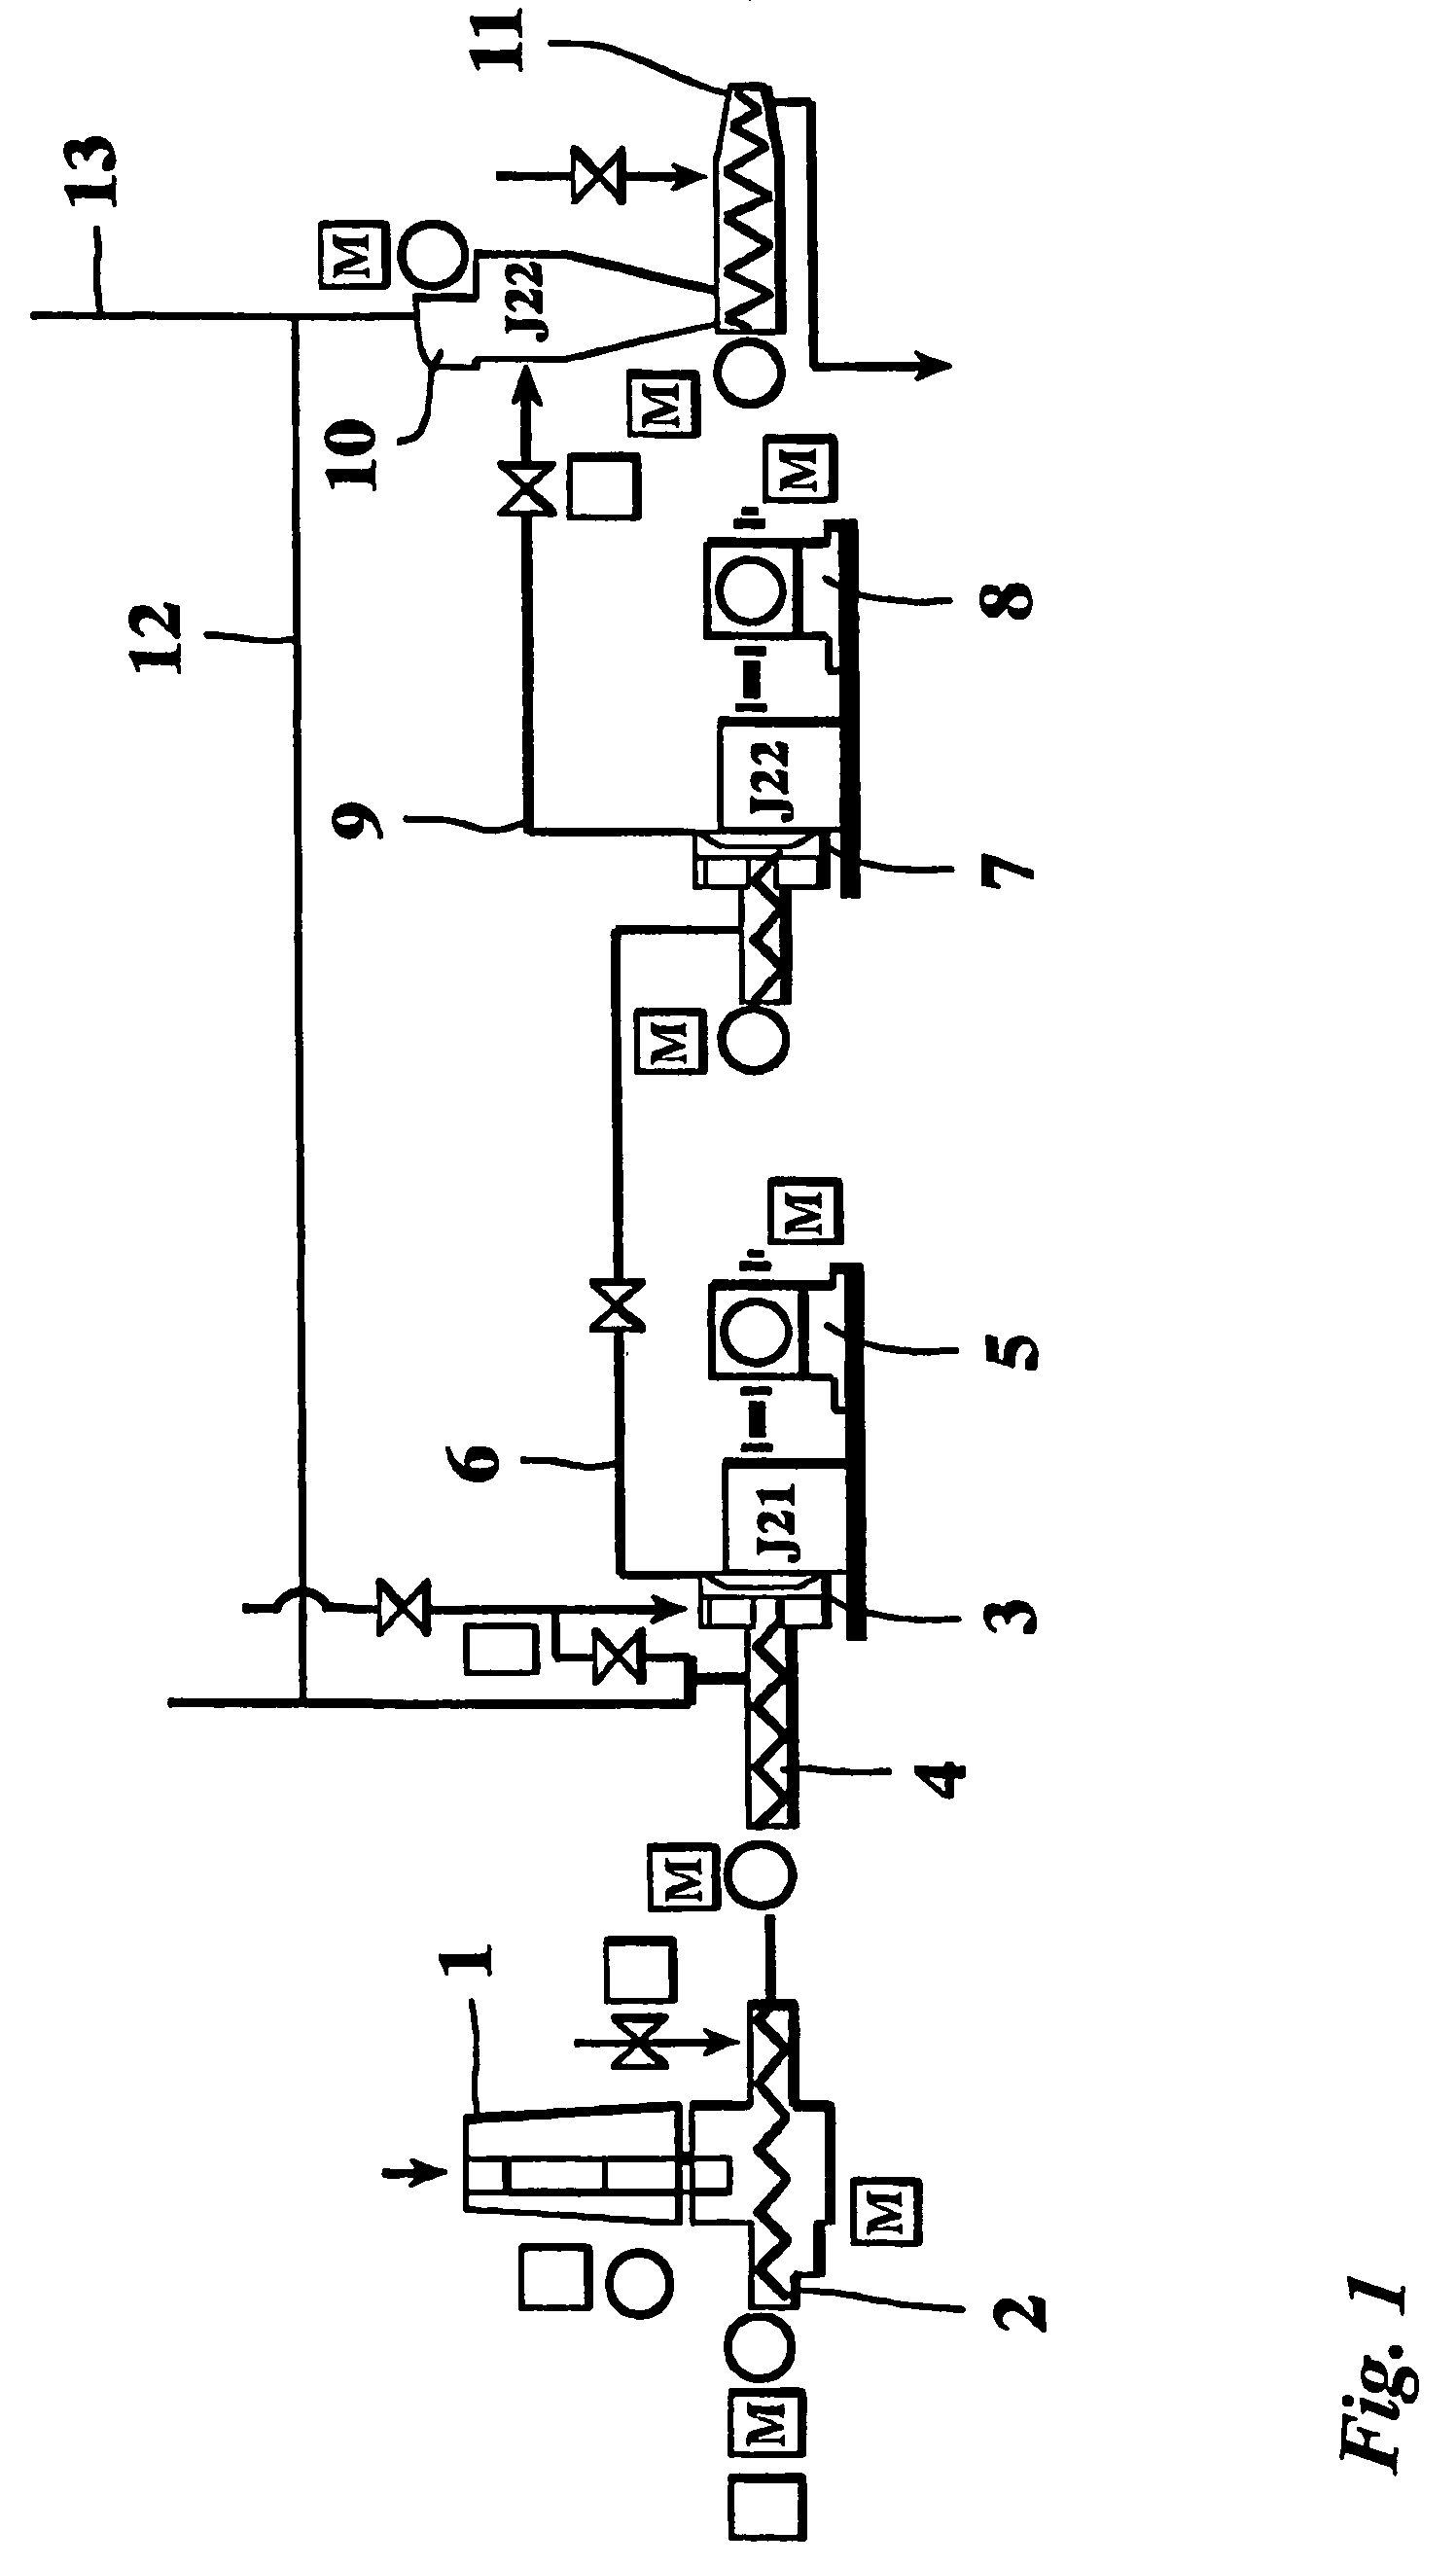 Method and apparatus for producing mechanical fibers